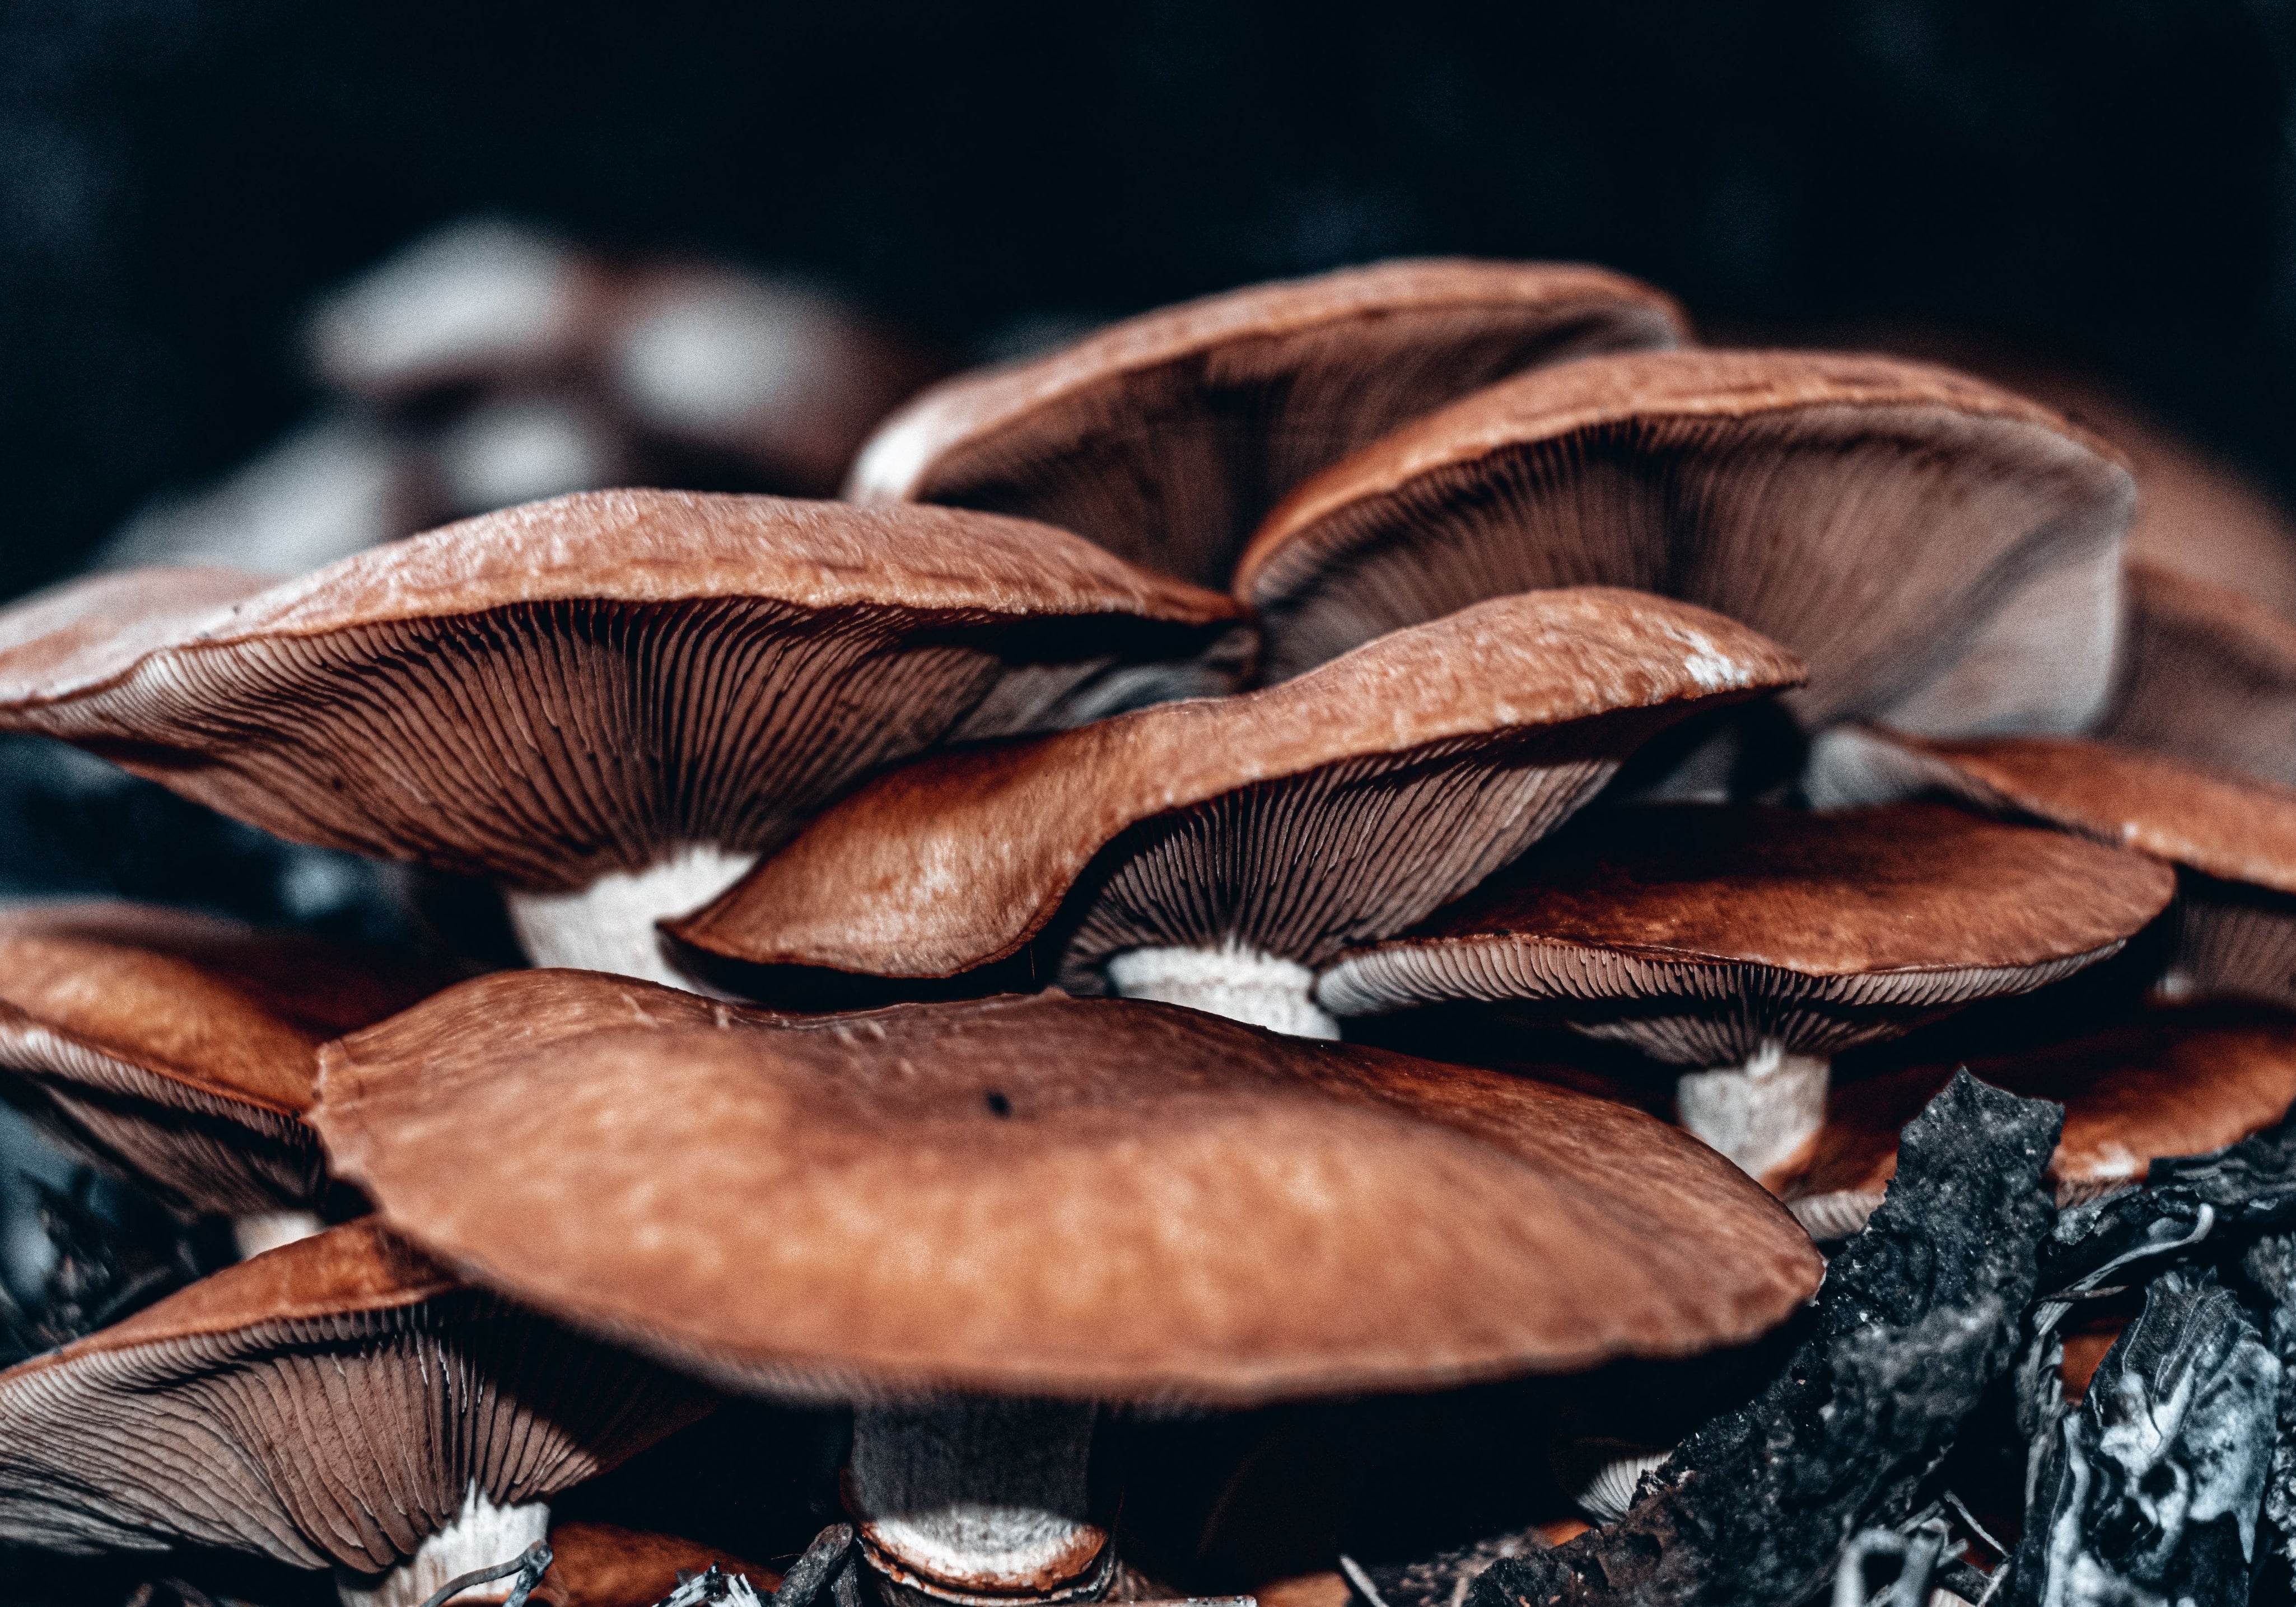 How To Tell If Mushrooms Are Bad: Signs To Look For